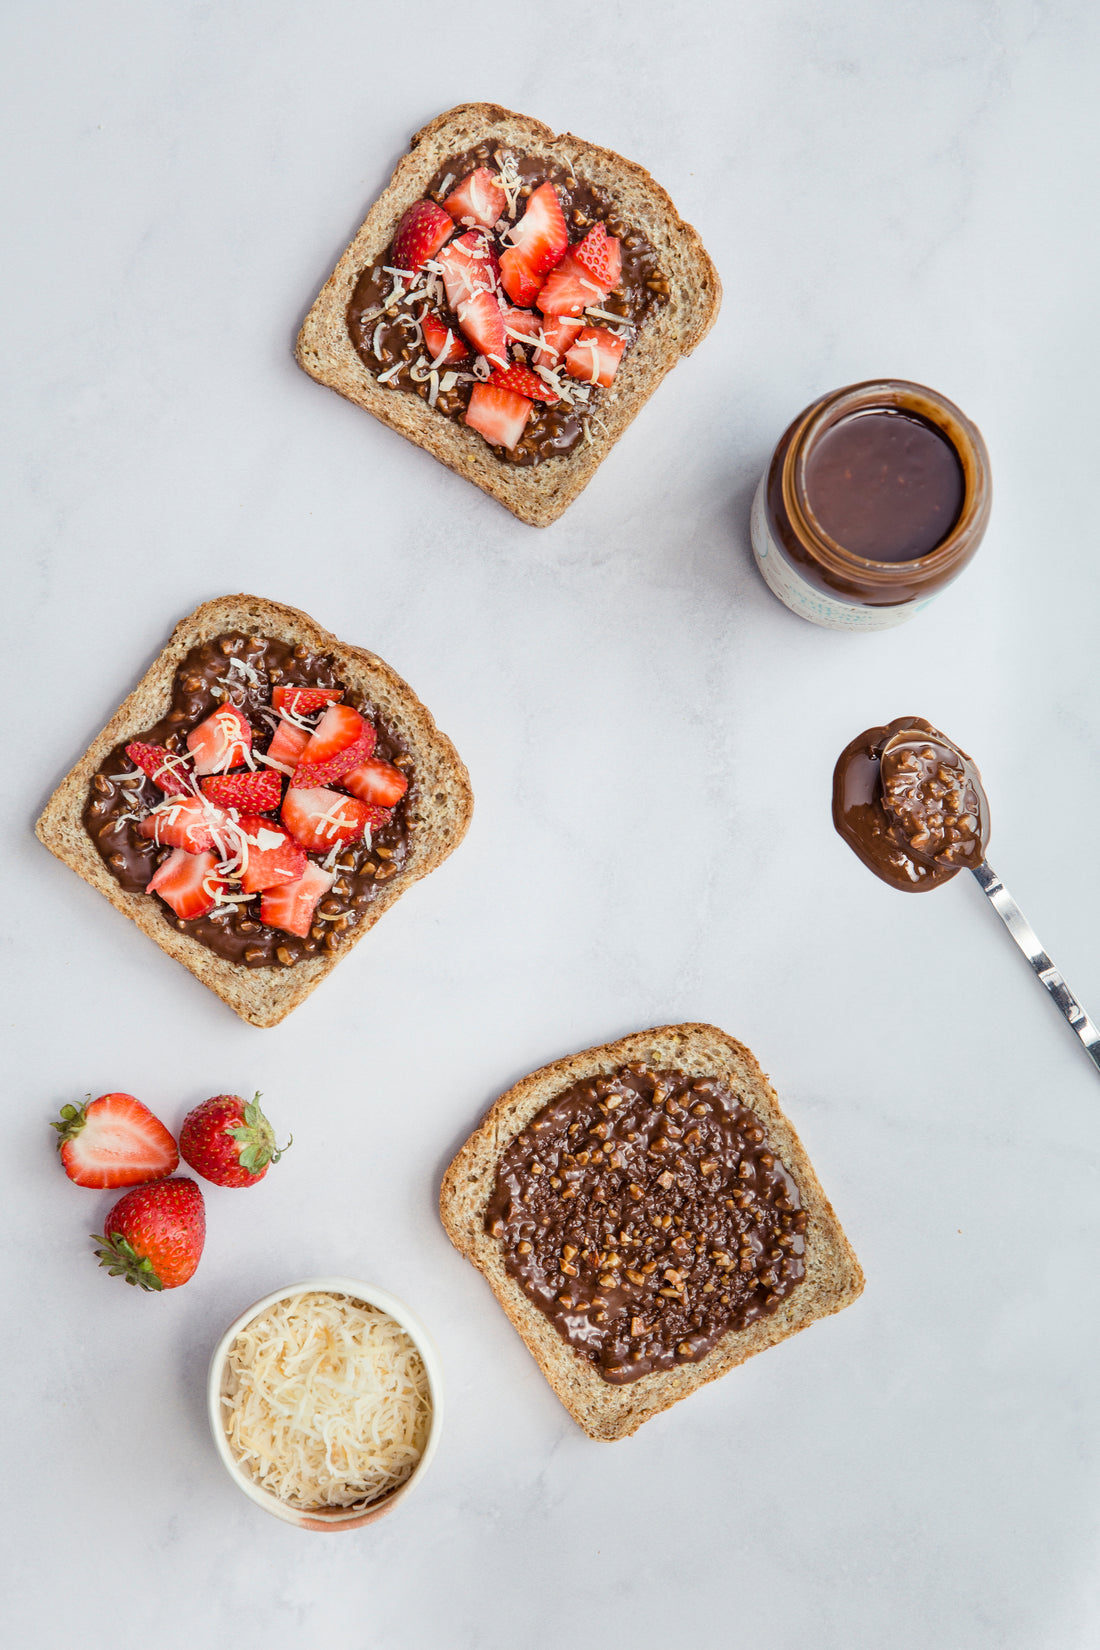 What is a Healthier Substitute for Nutella?